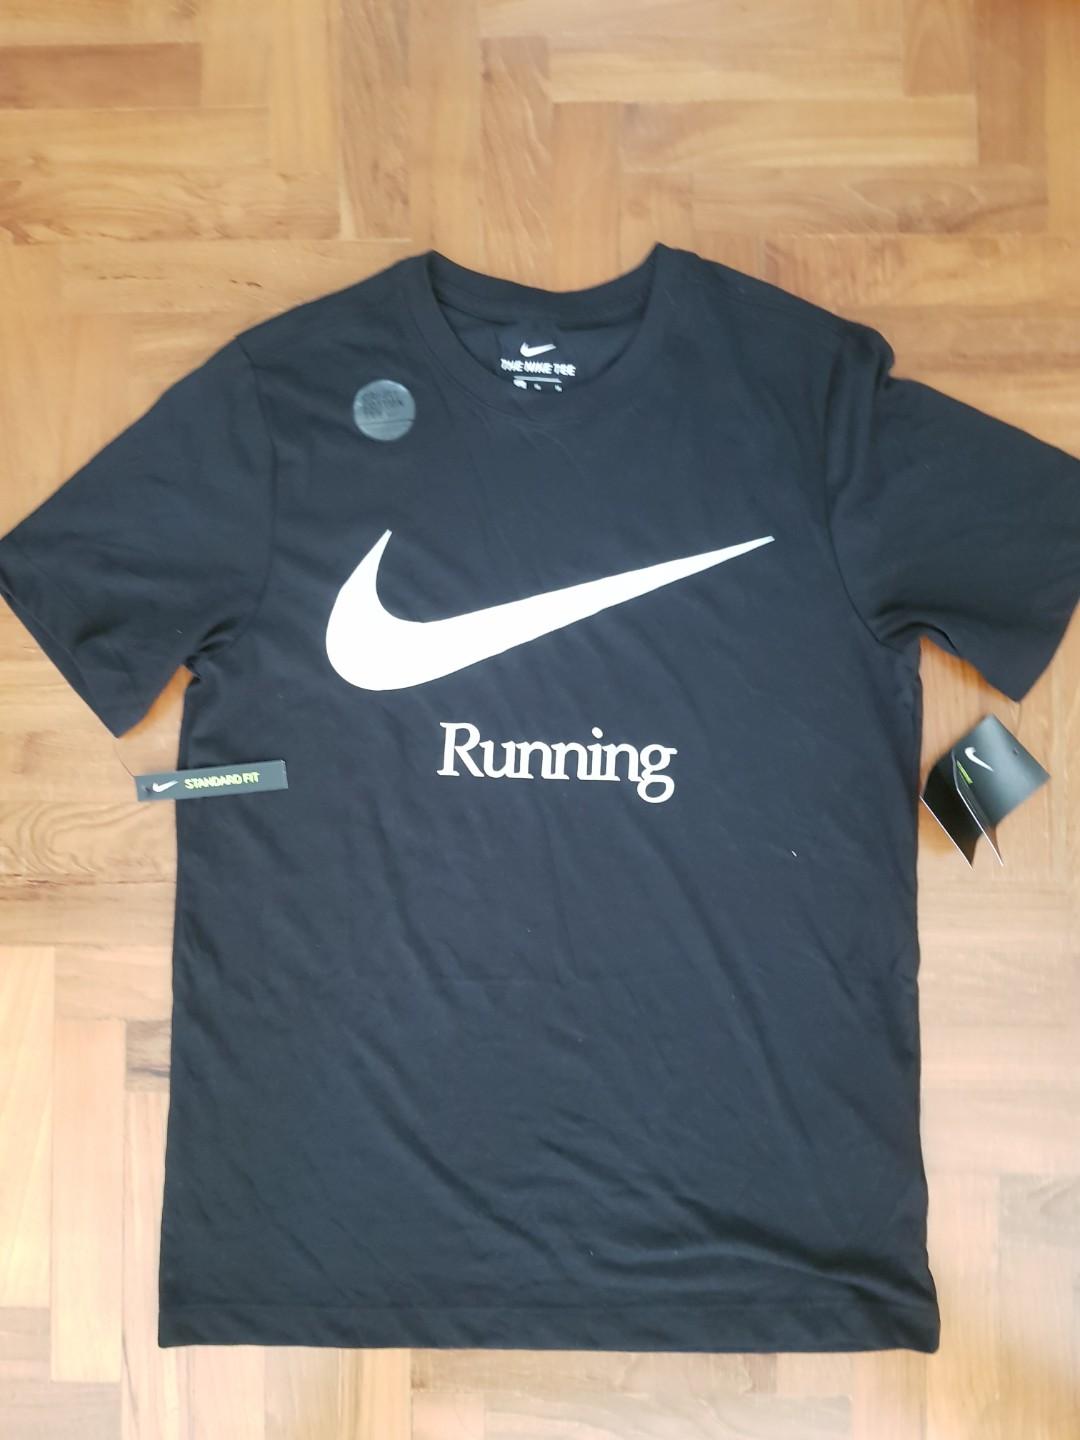 Nike T shirt new with tags, Men's 